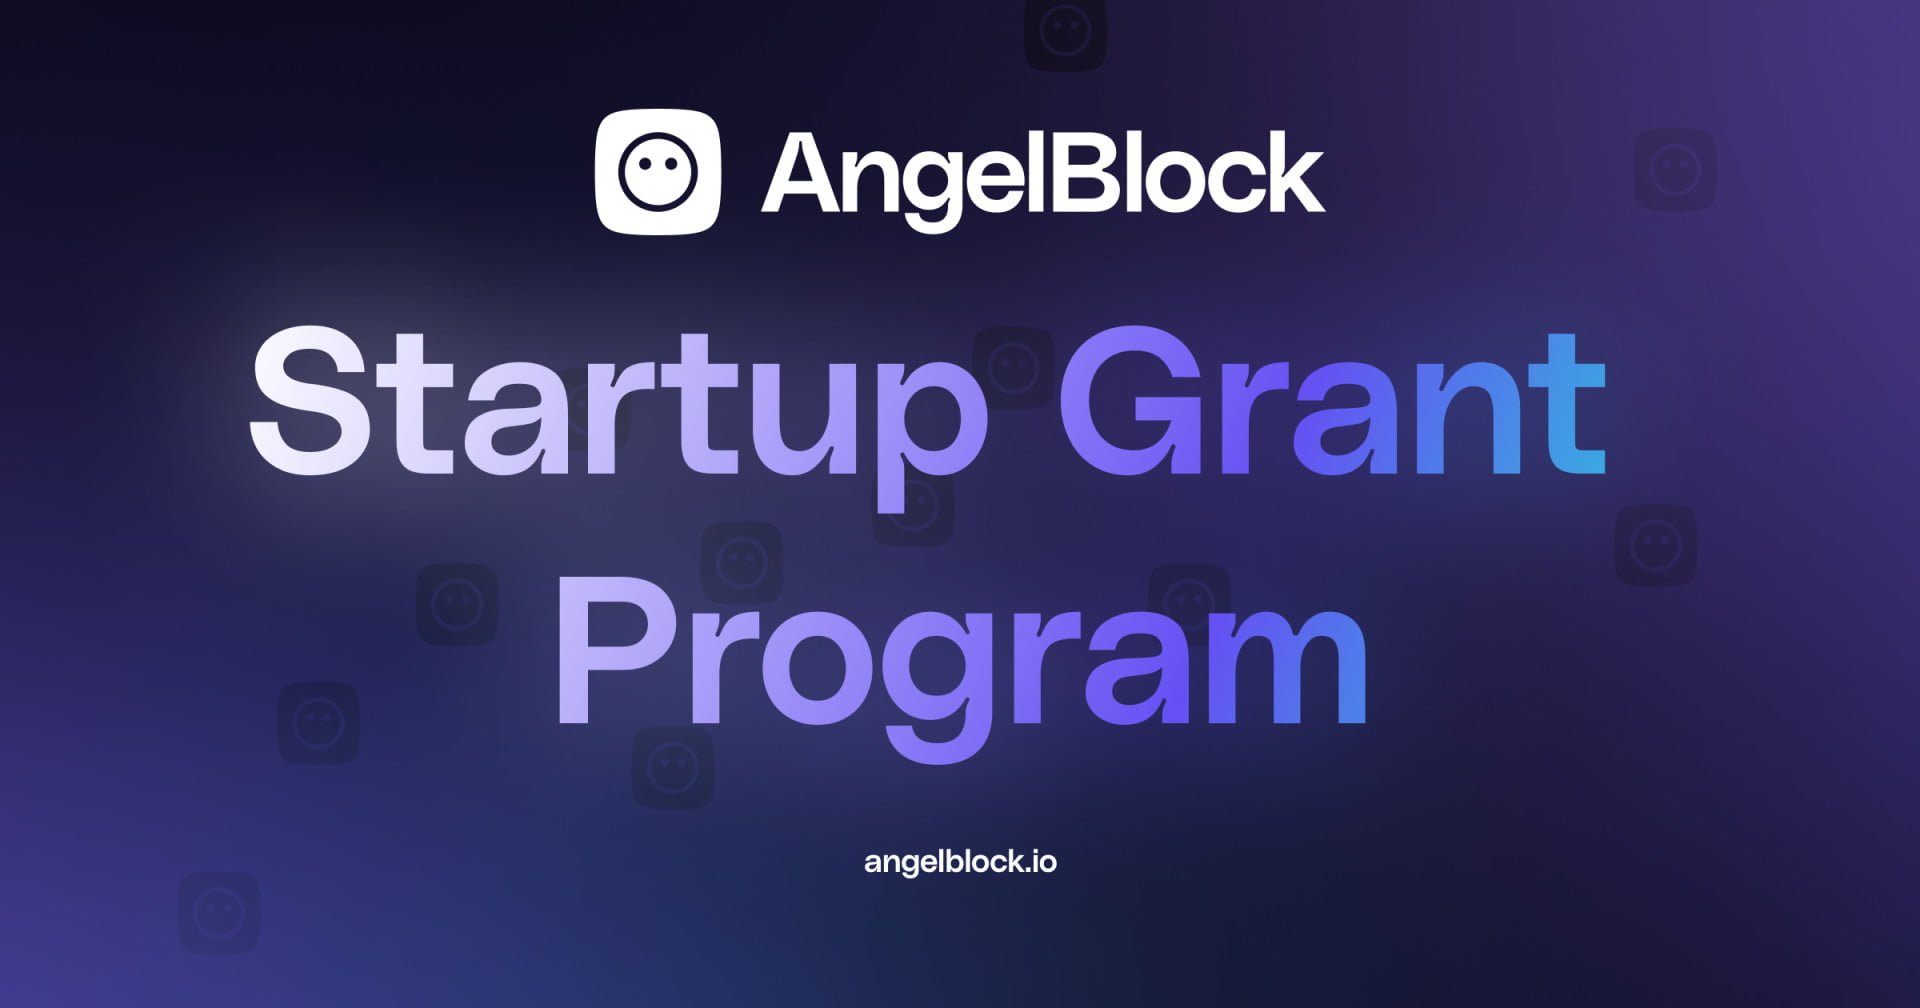 AngelBlock, DeFi protocol for crypto-native fundraising, announces it’s Startup Grant Program and platform launch 4